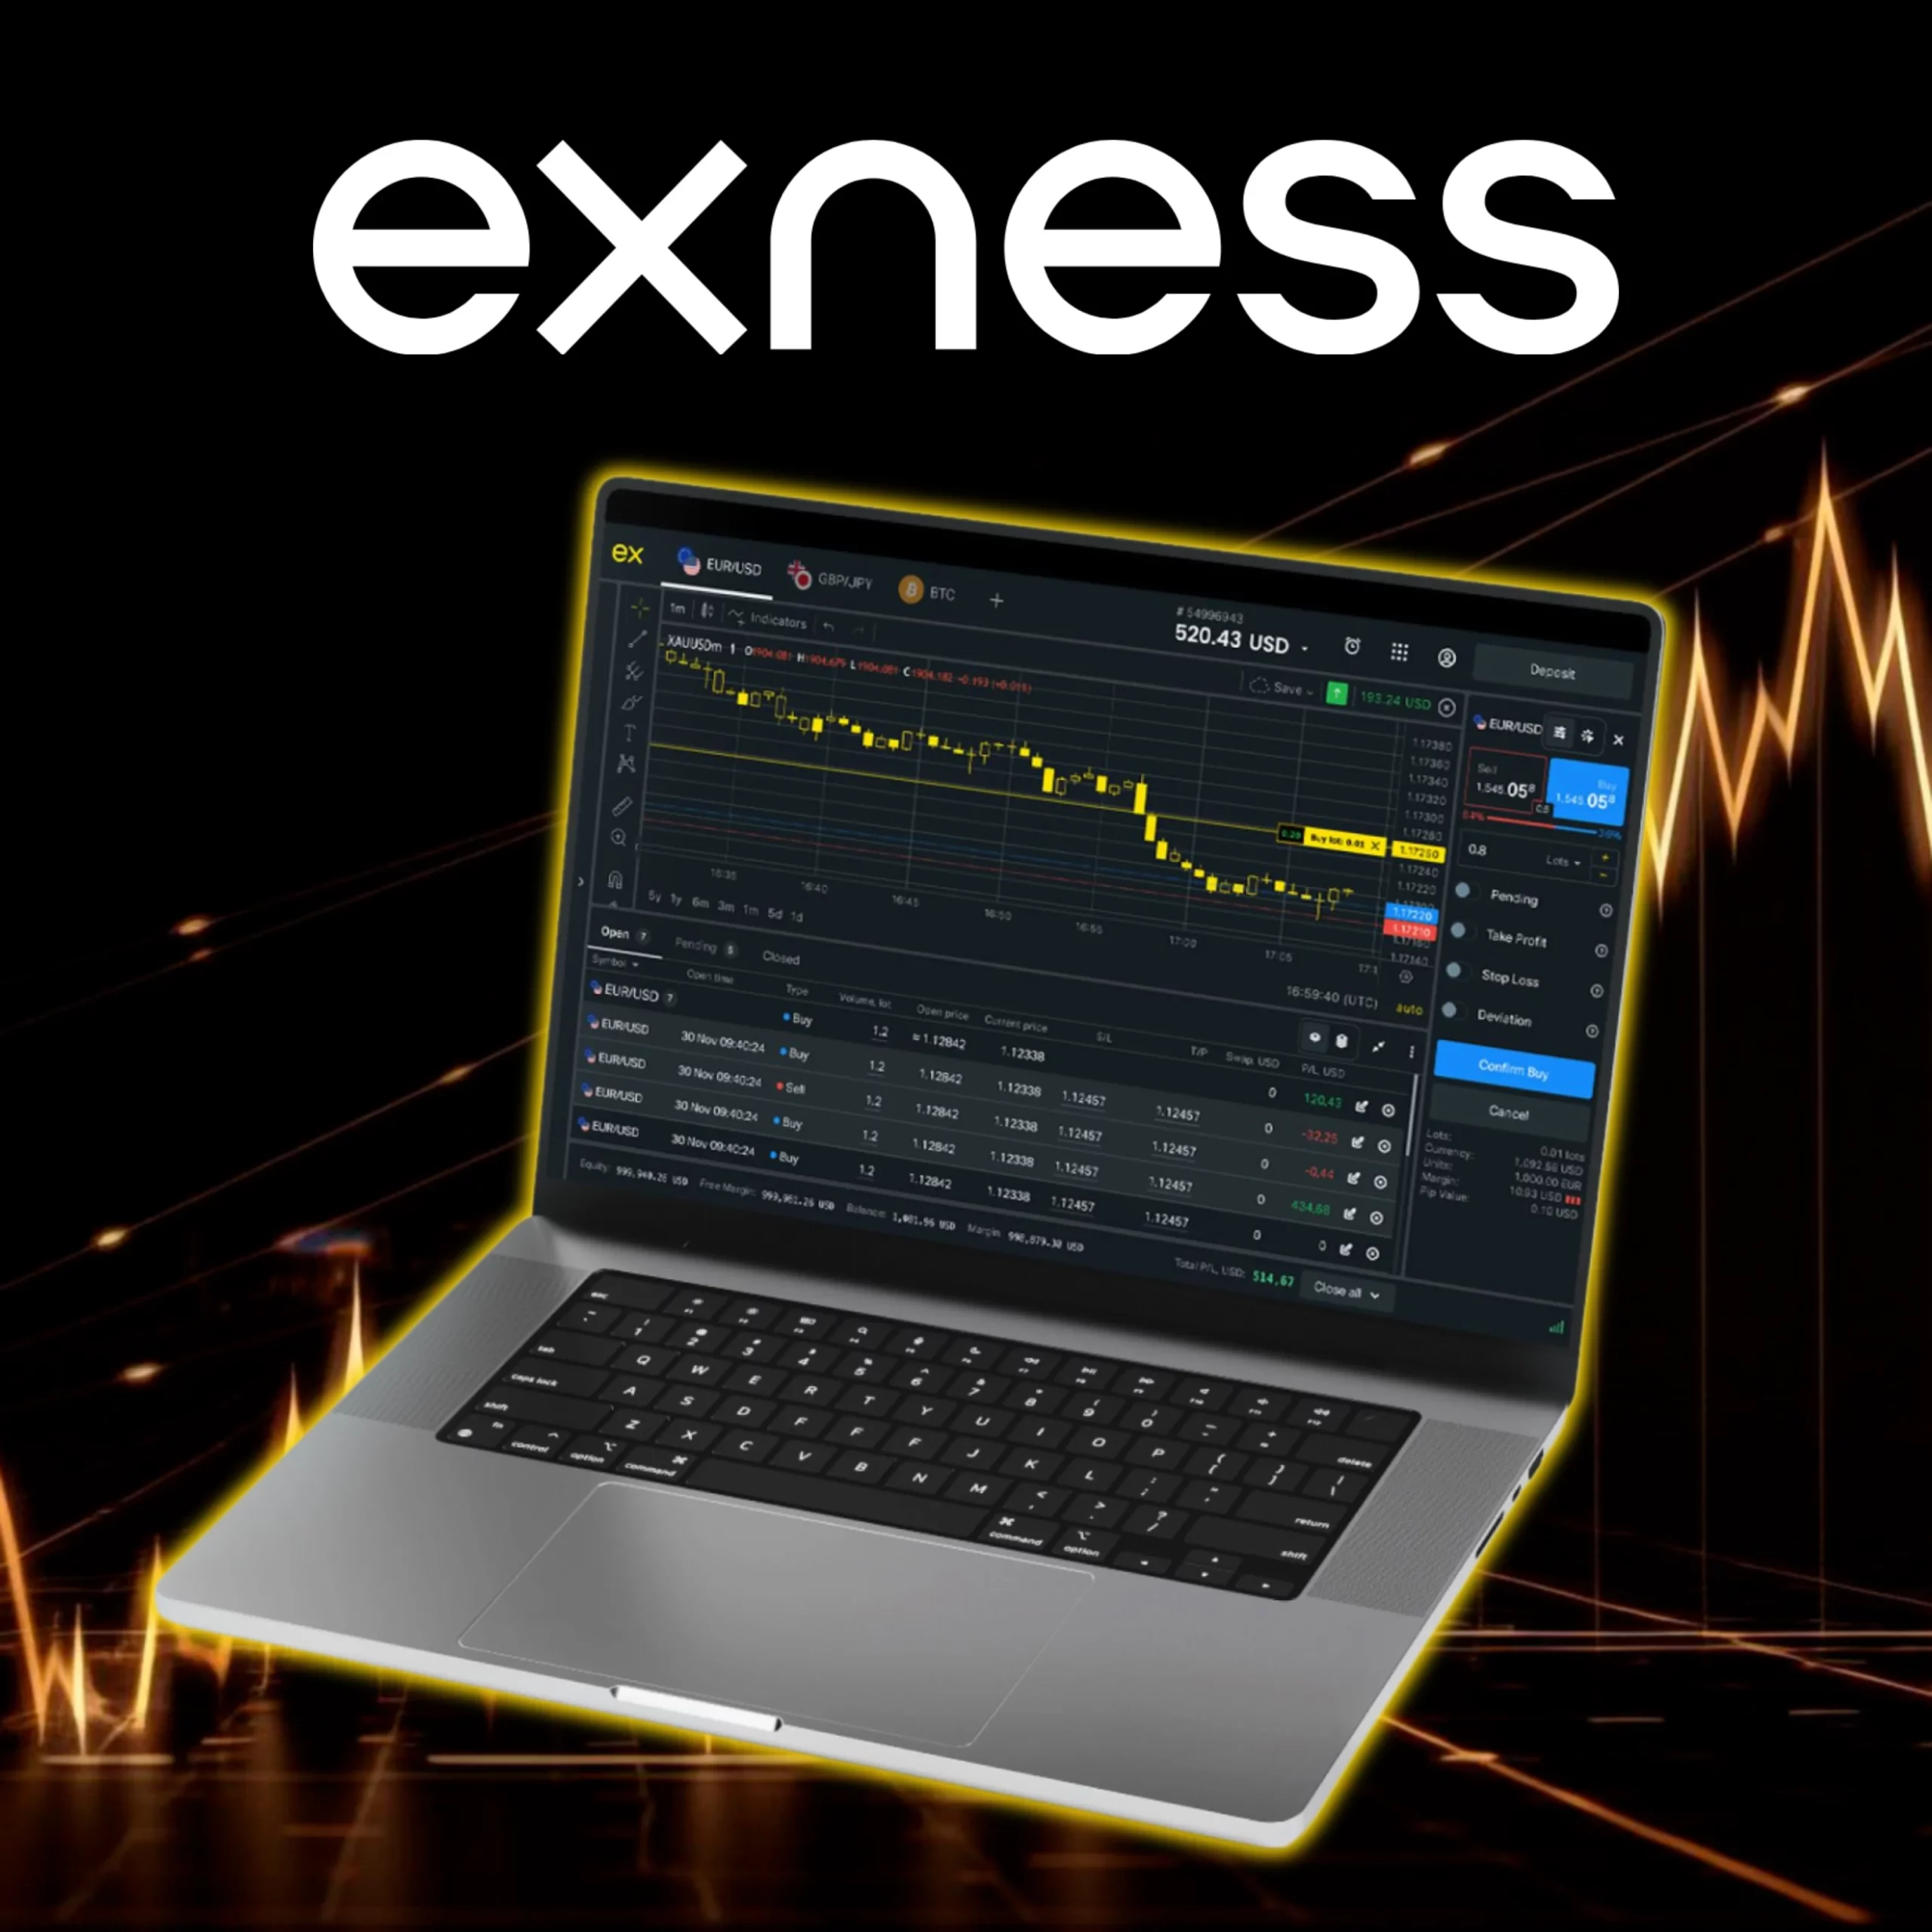 Exness Web Terminal Primary Features